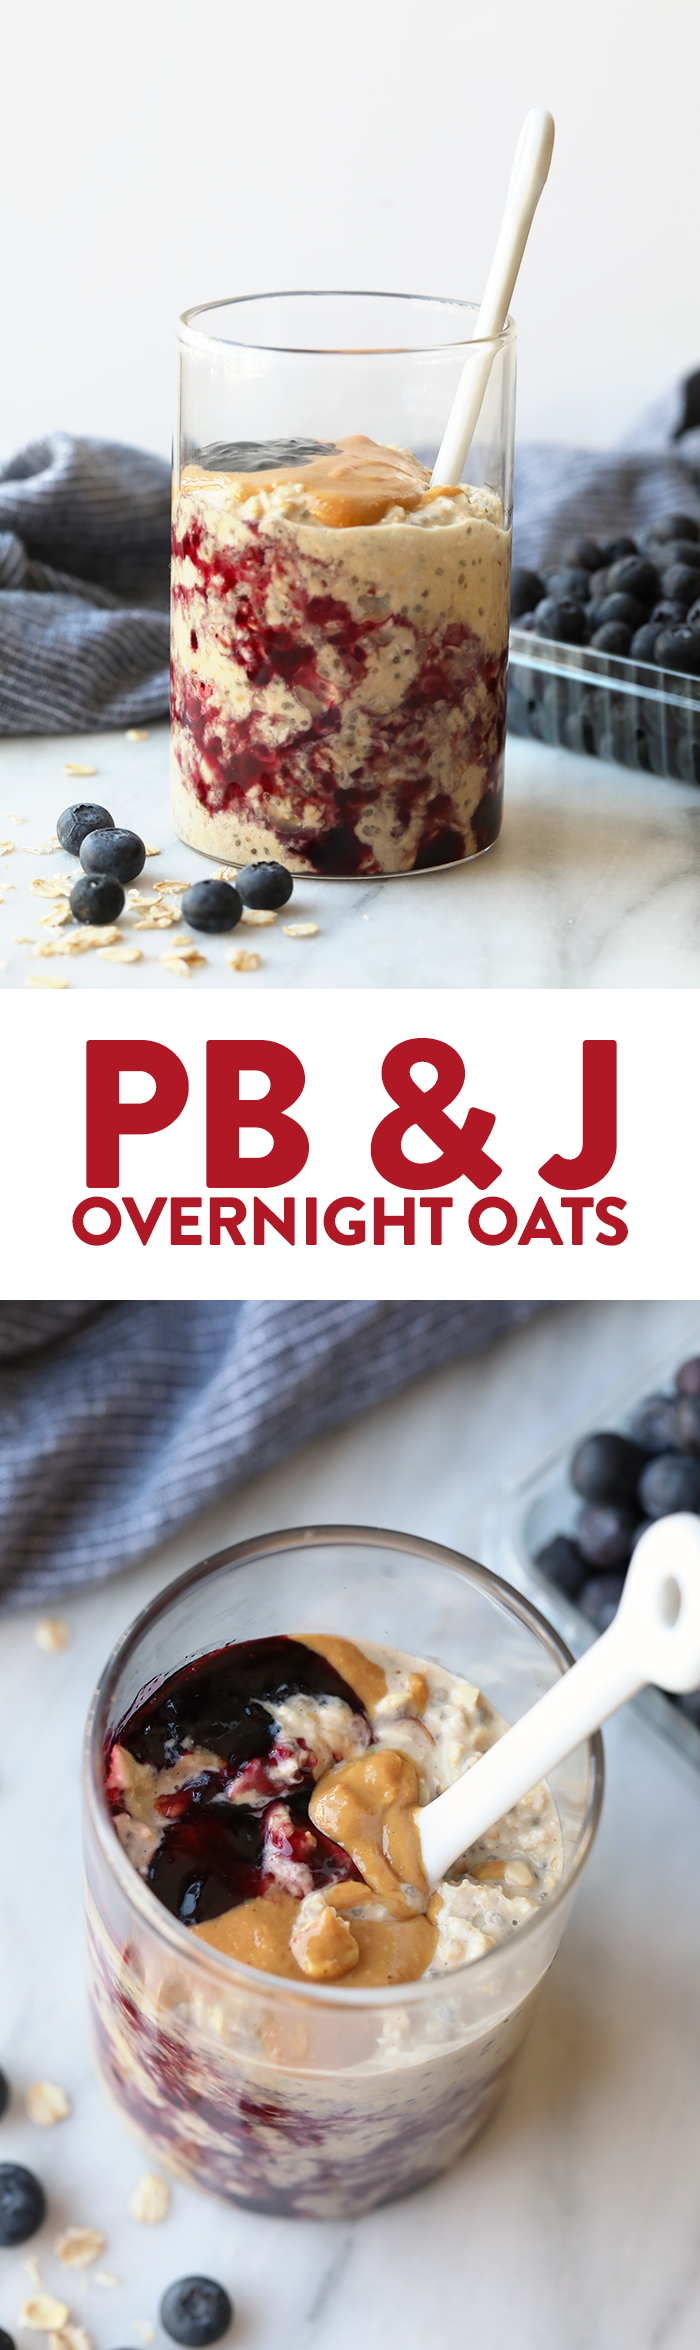 PB and J Overnight Oats - Fit Foodie Finds